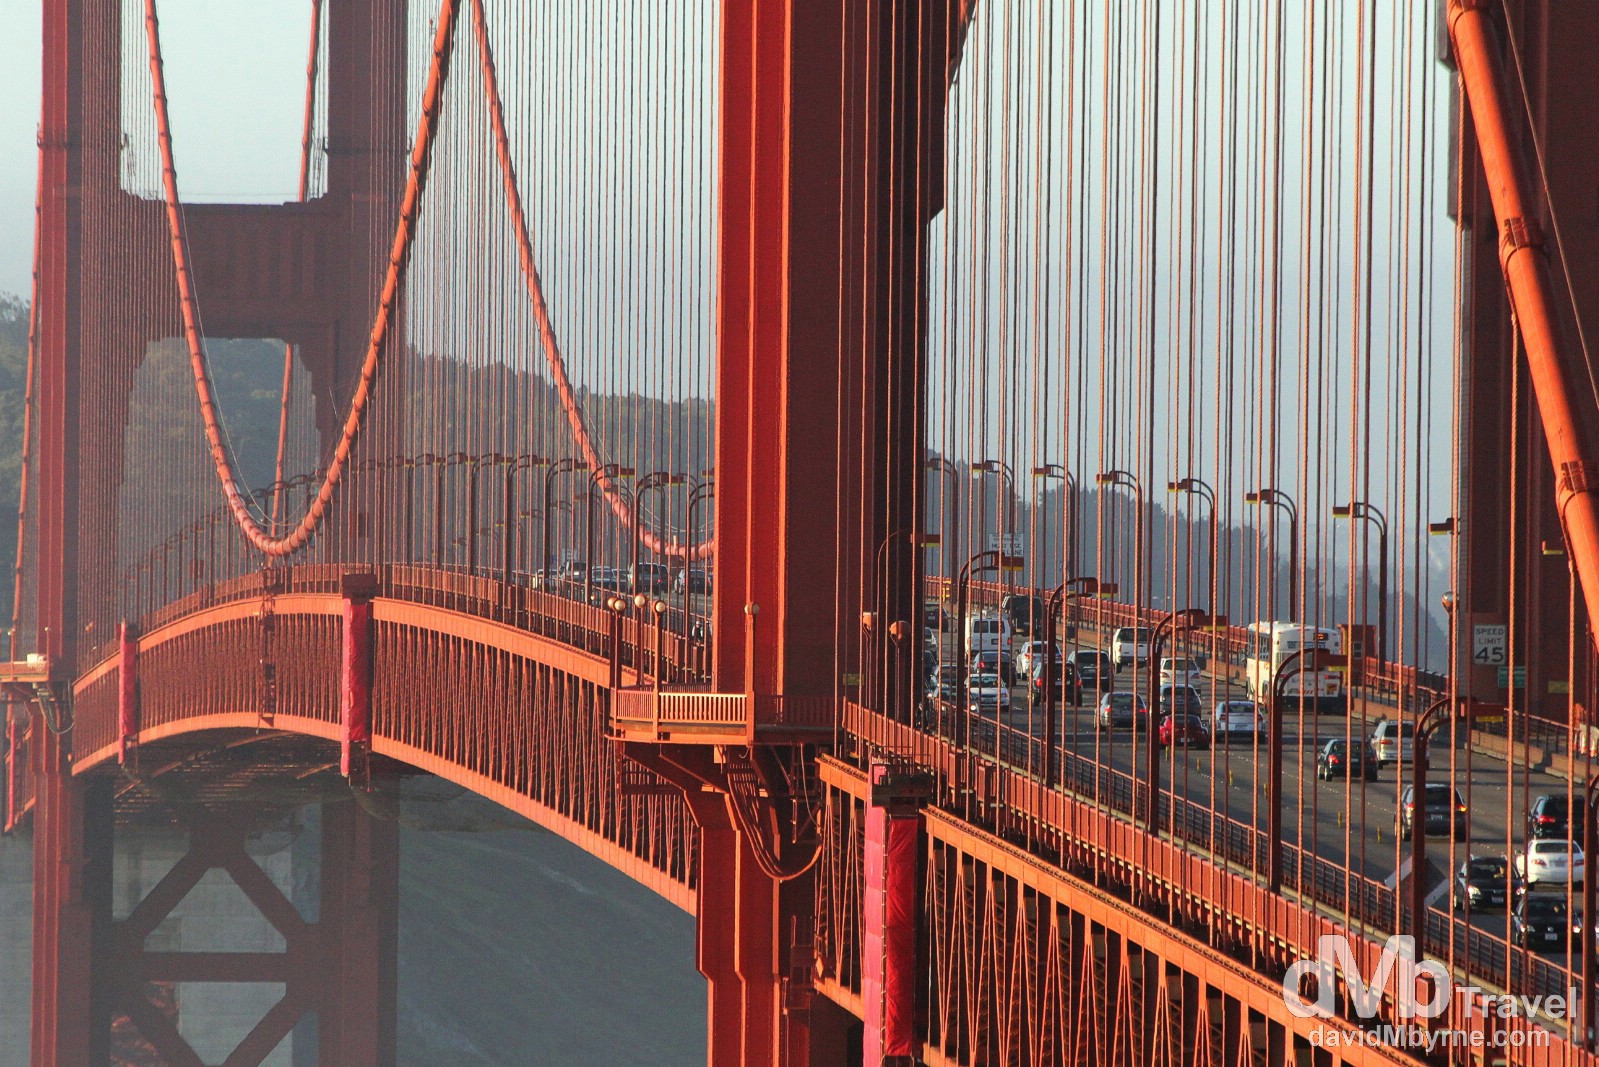 Sunrise light illuminates the span of The Golden Gate Bridge as seen from Vista Point on the north-eastern side of the bridge. San Francisco, California, USA. April 11th 2013.